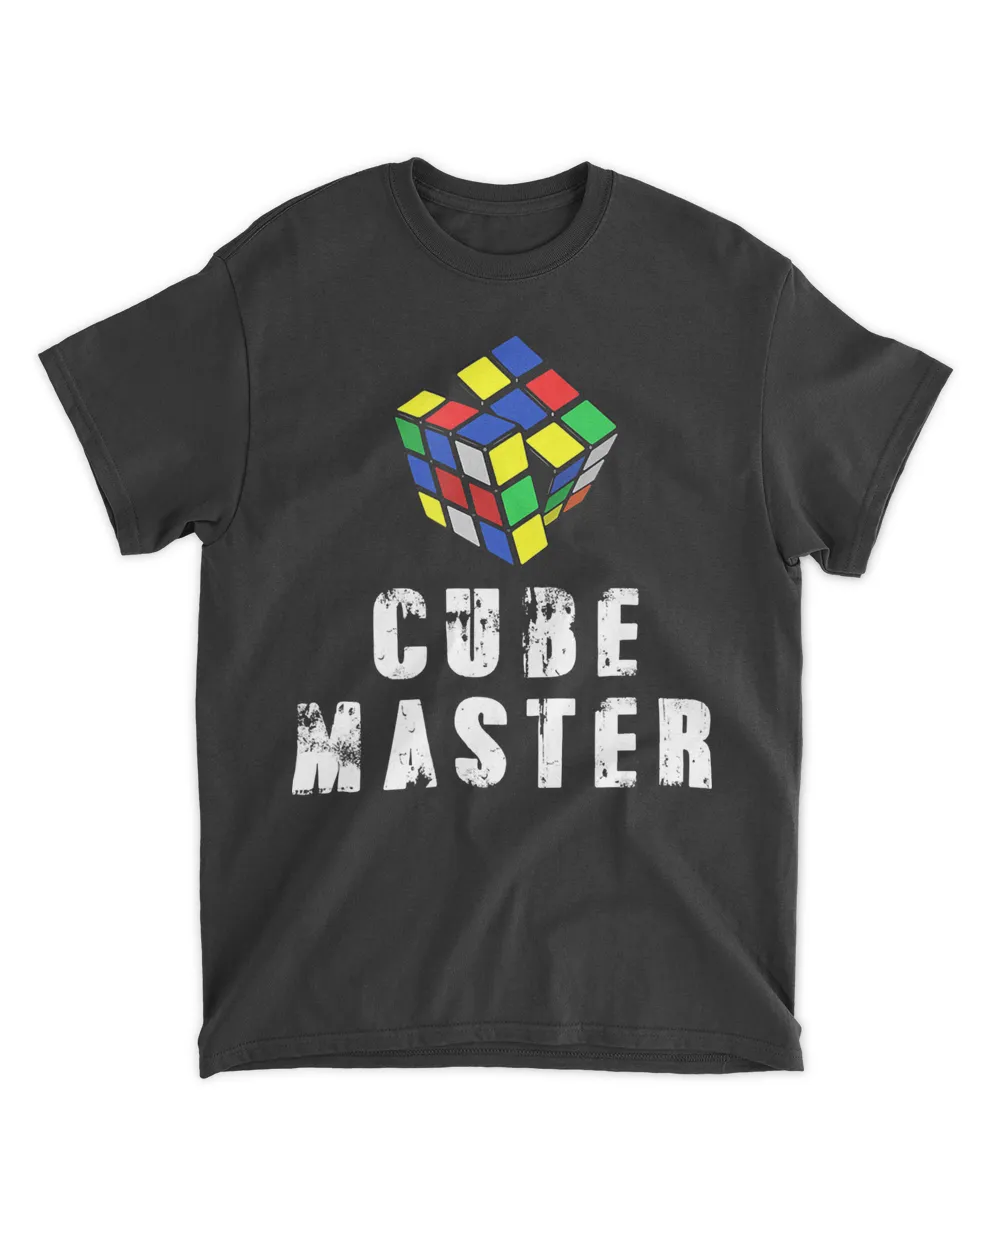 Awesome Graphic Melting Rubiks Cube Solved Cube Master Lover 30n5